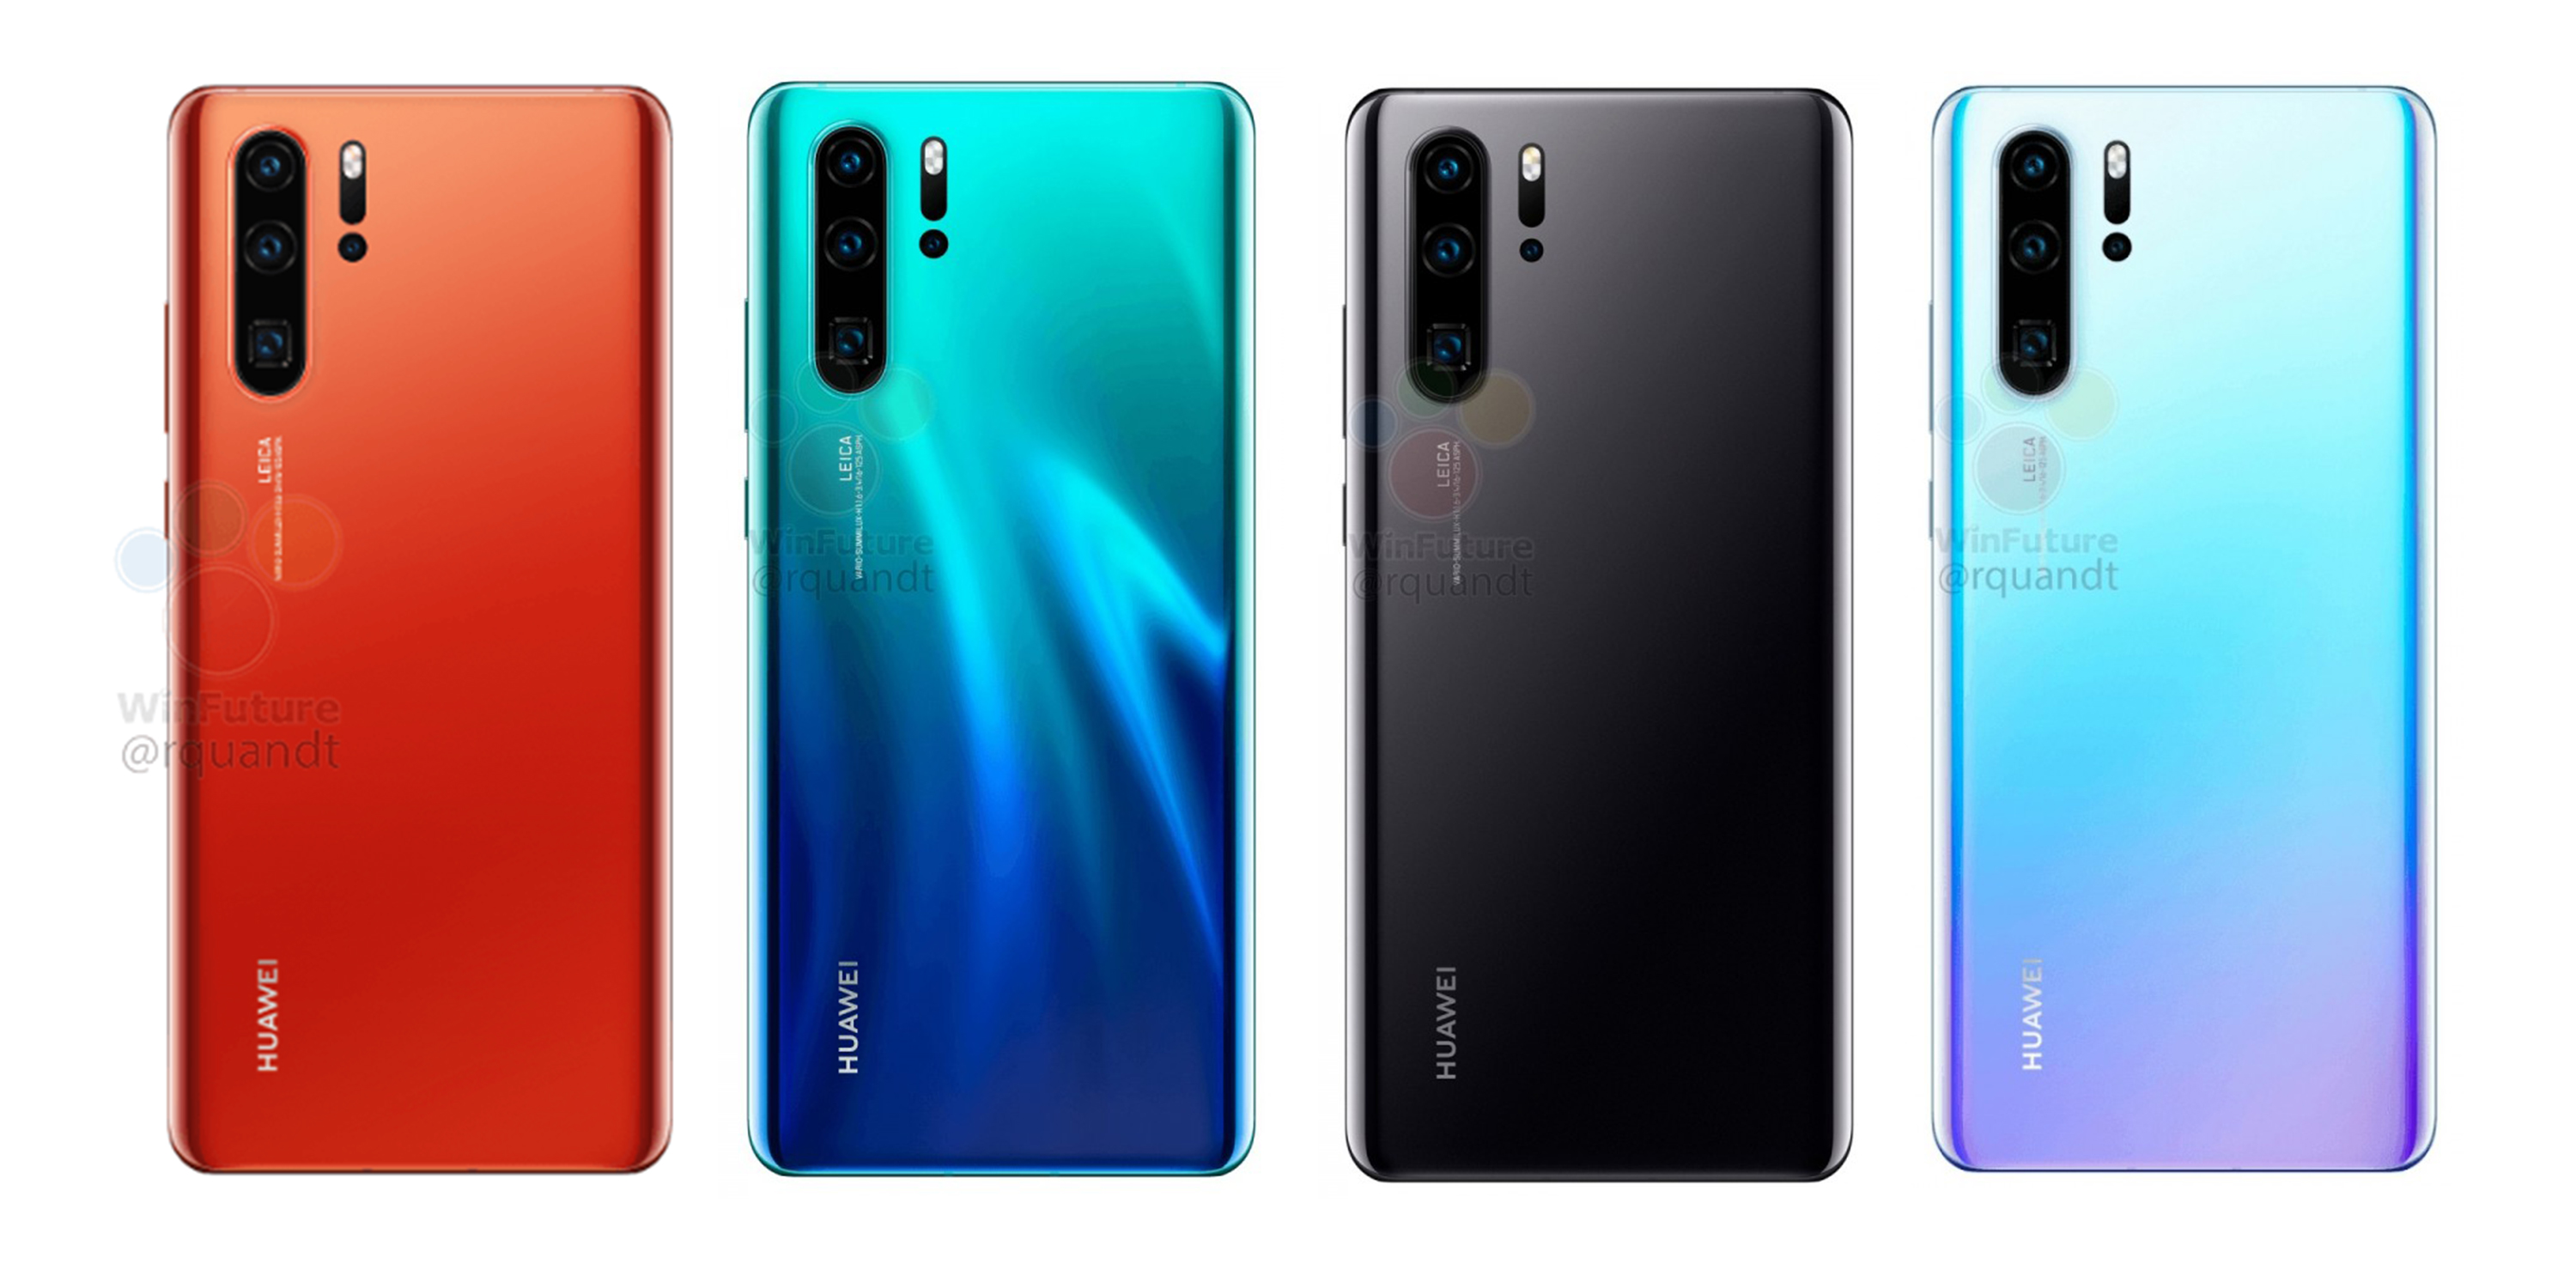 ensillar Independiente Posada Huawei P30 and P30 Pro full specs leak giving us an even bigger picture w/  new colors